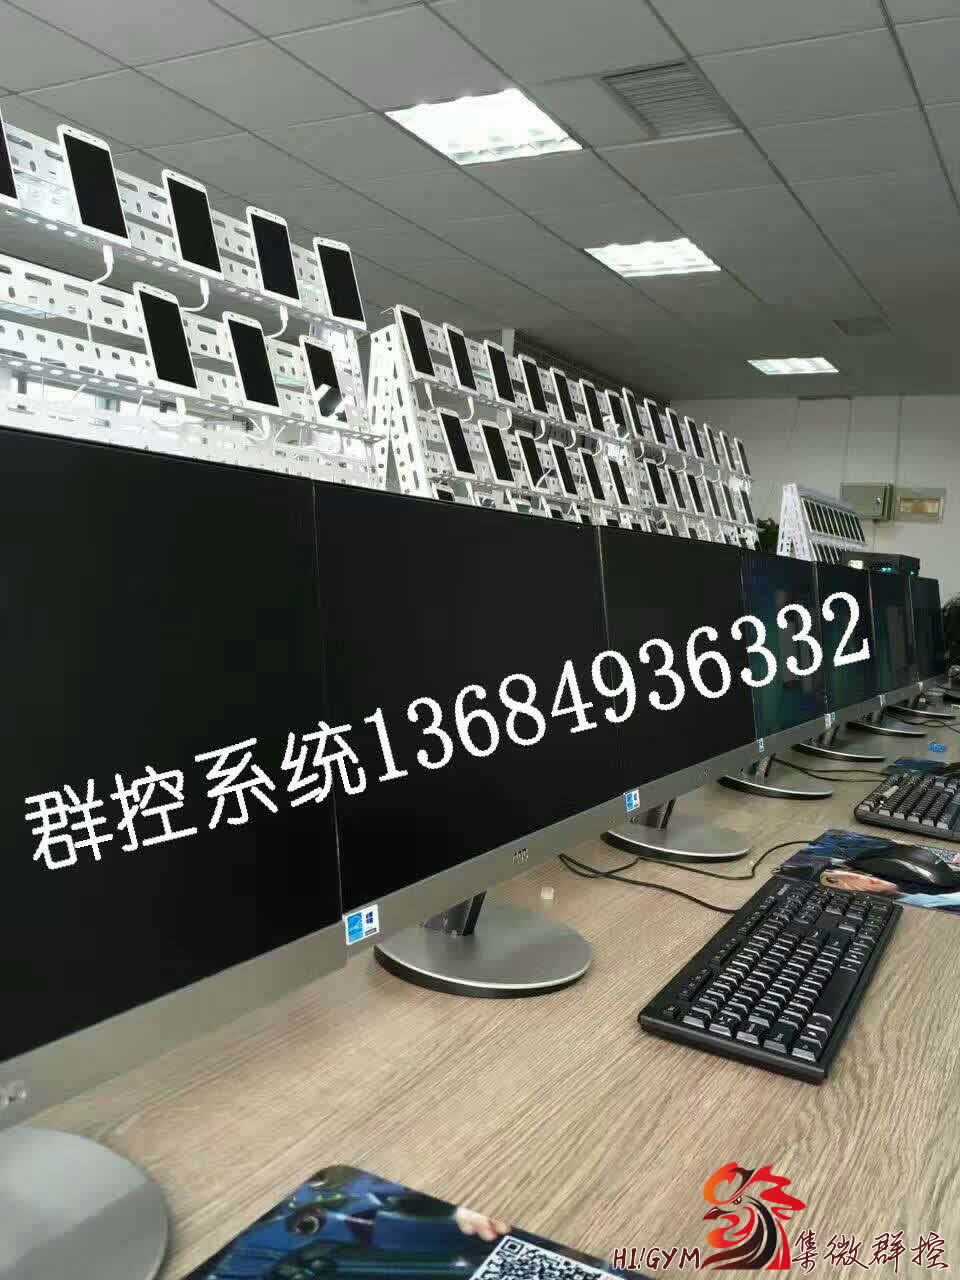 China WeChat Group-Control, Set micro-group control system is running under the WINDOWS system, simple operation, stable opera factory